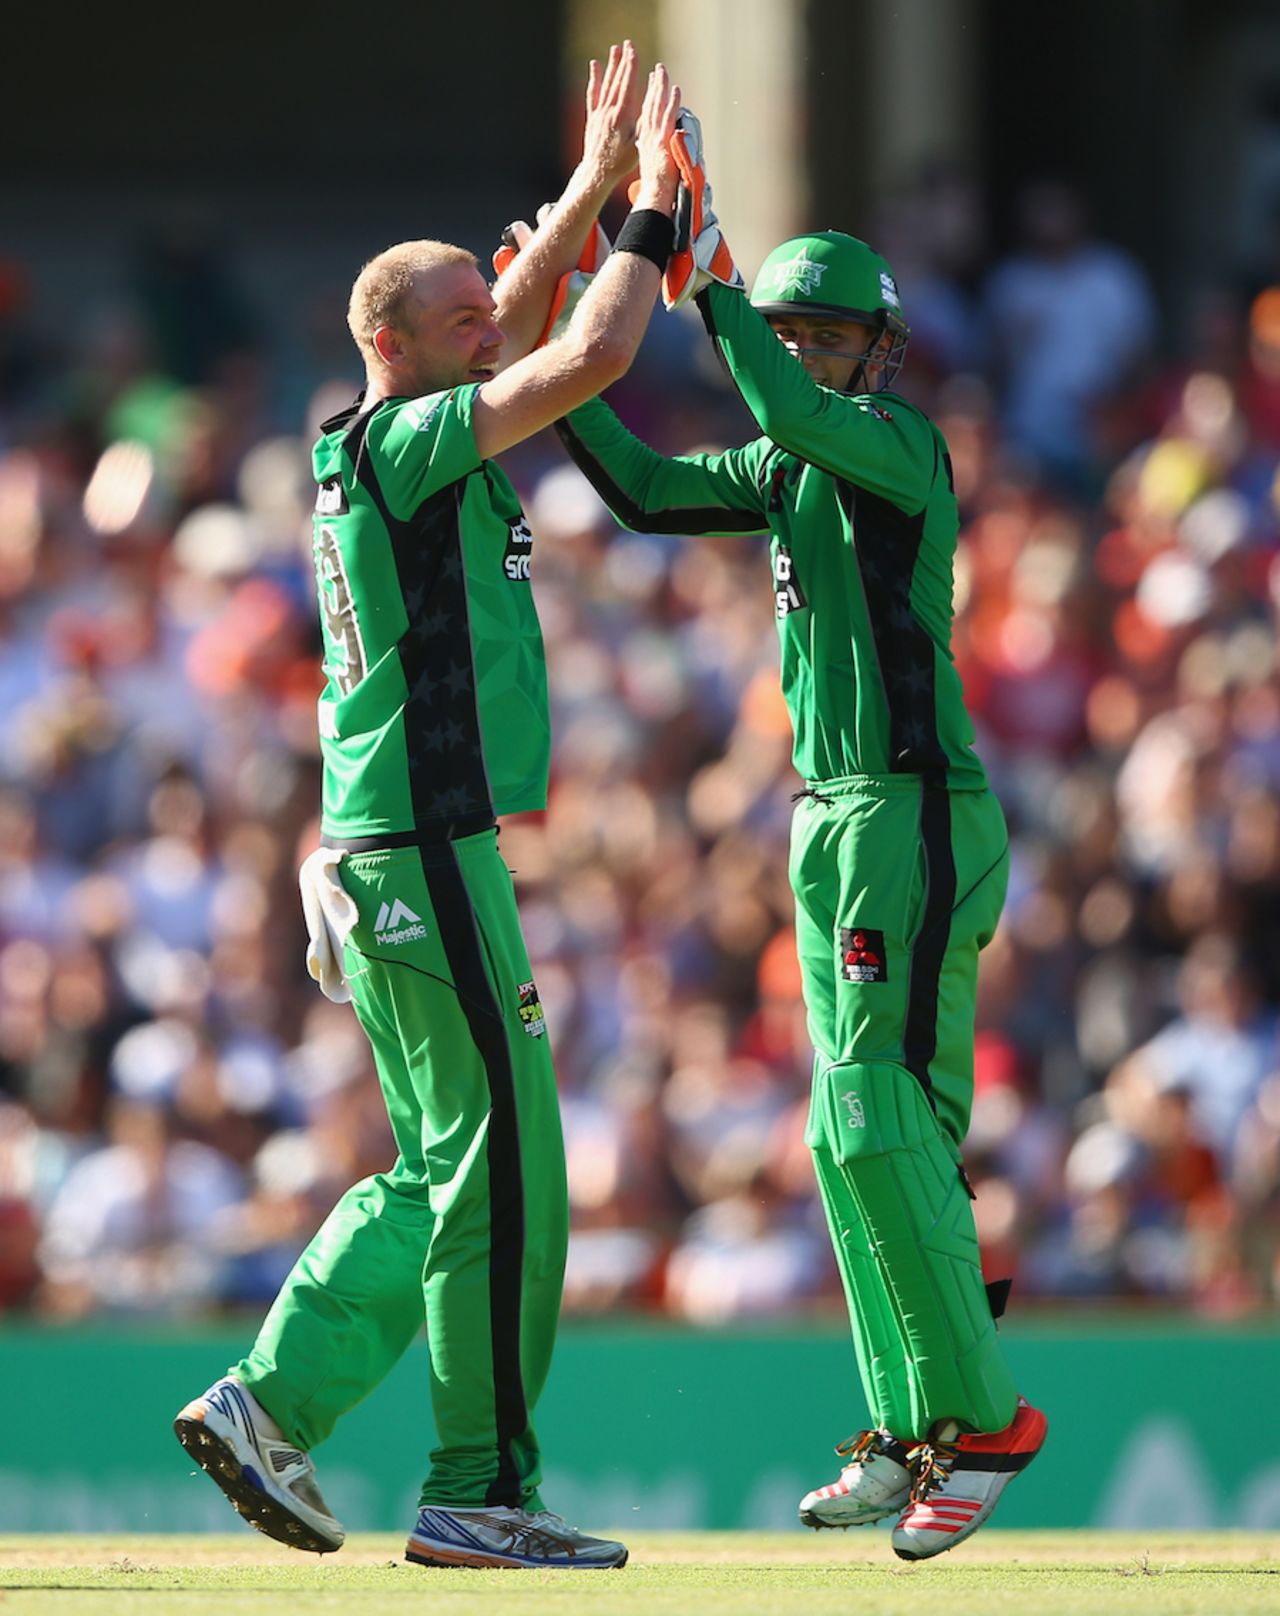 Michael Beer picked up two wickets, Perth Scorchers v Melbourne Stars, Big Bash League 2014-15, semi-final, Perth, January 25, 2015